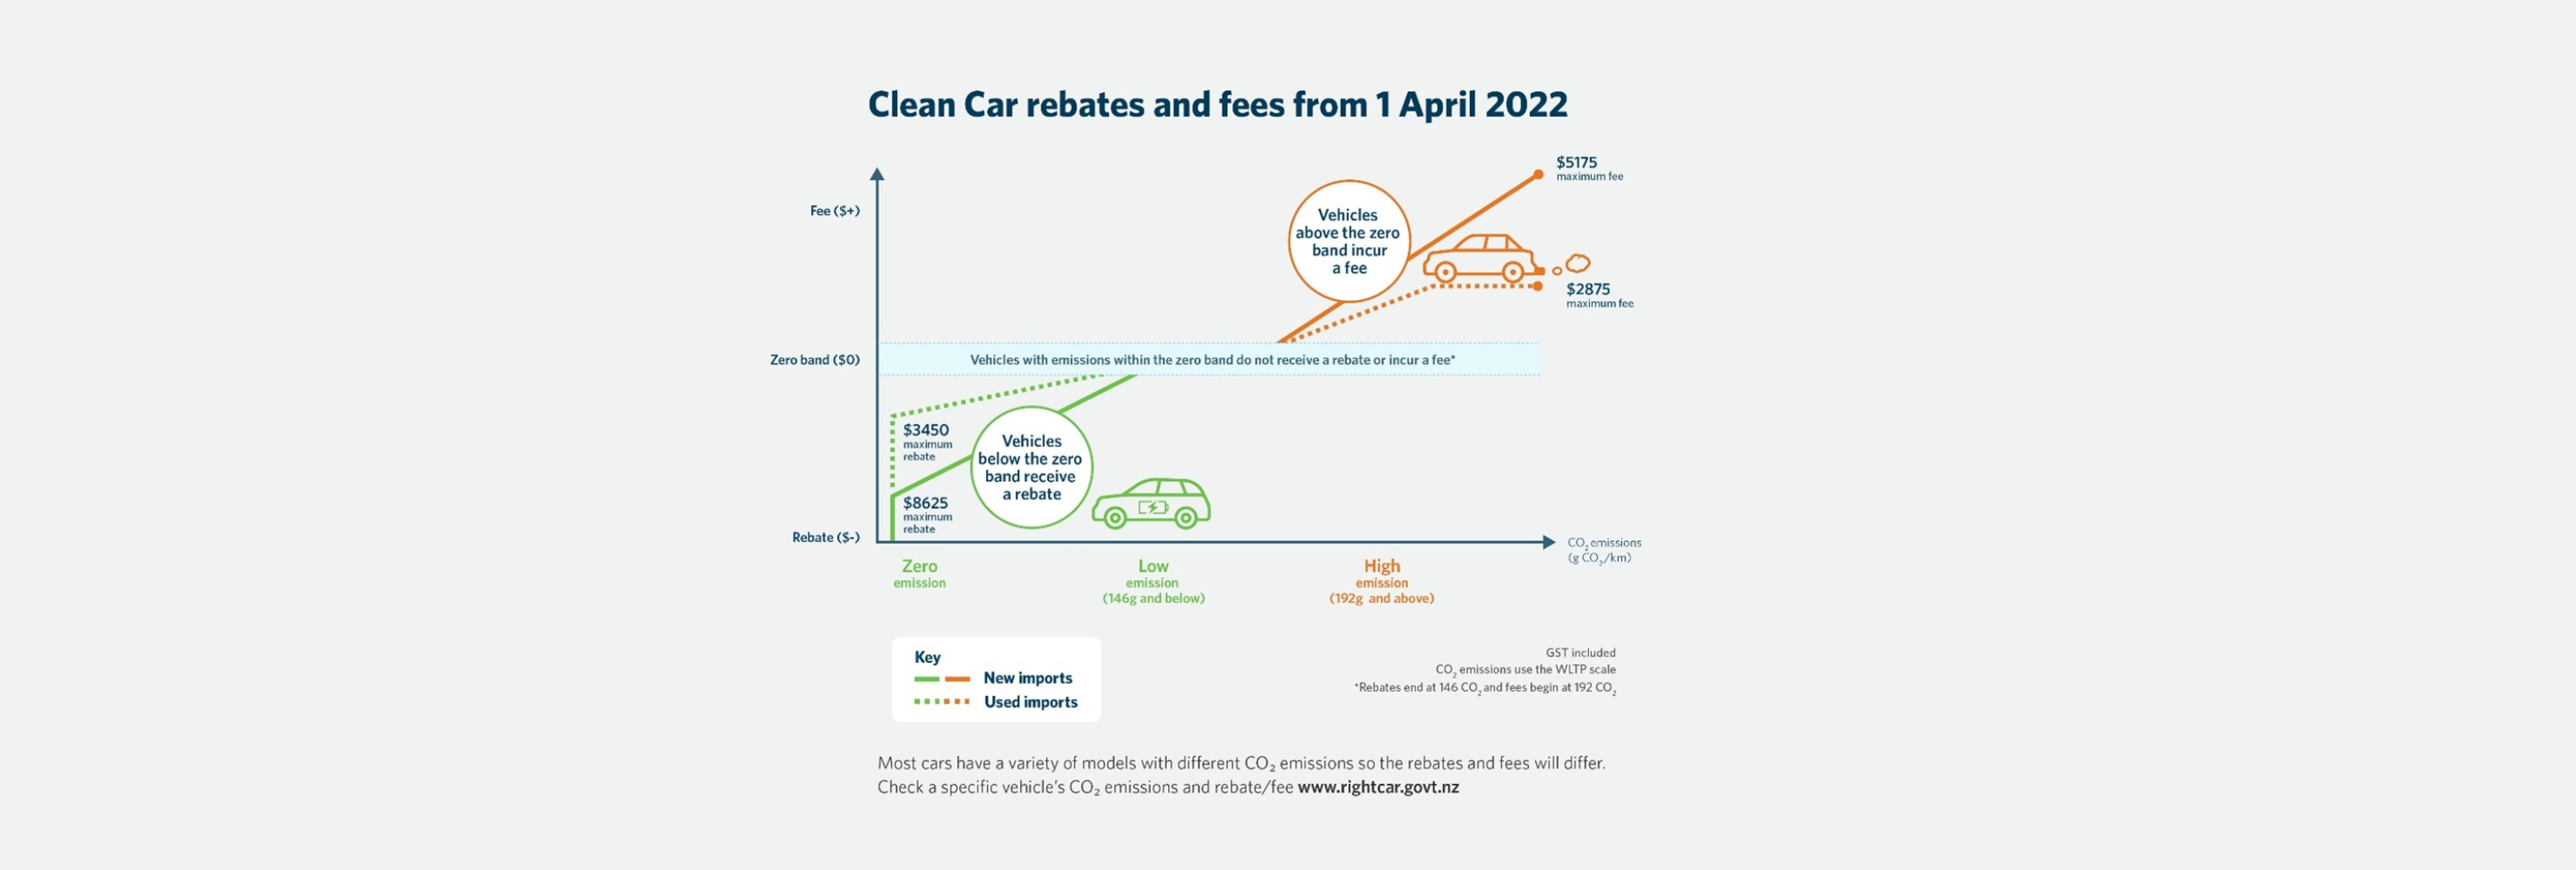 Clean Car Discount Infographic